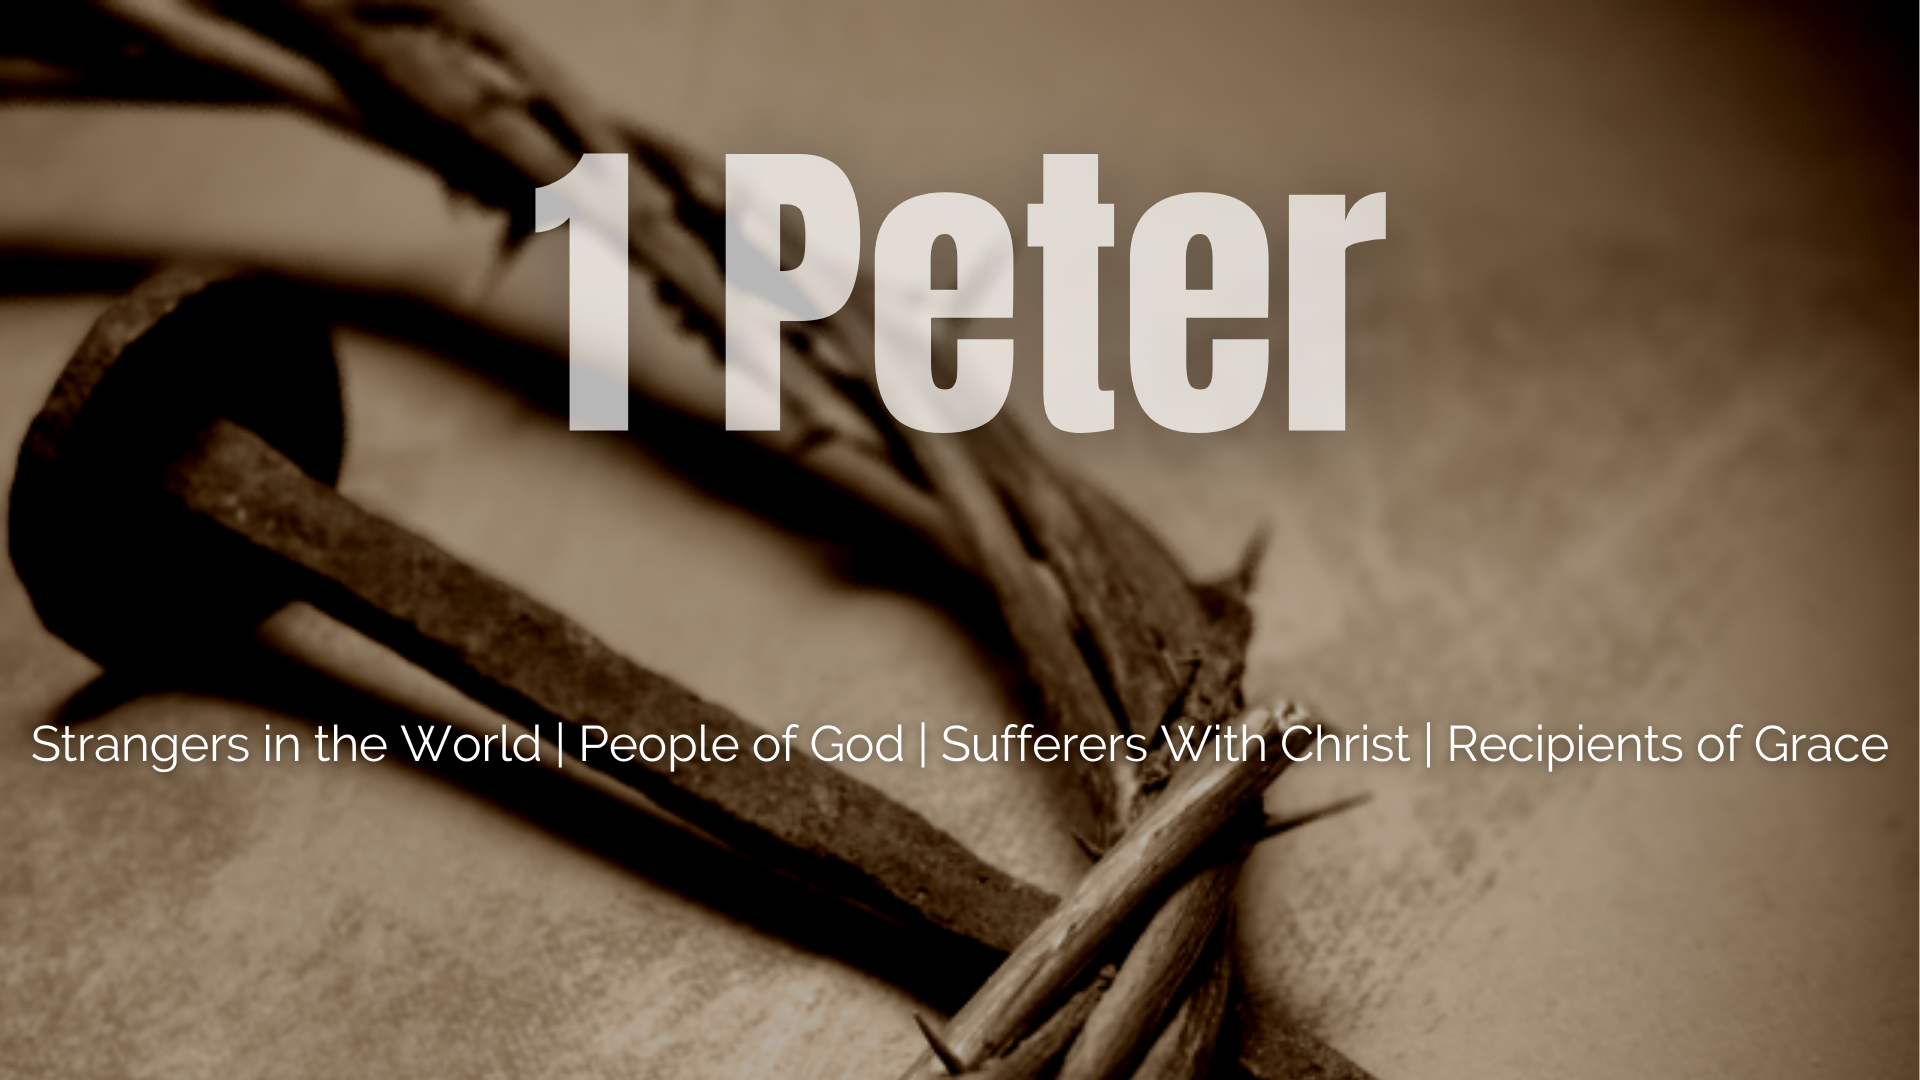 1 Peter: Strangers in the World